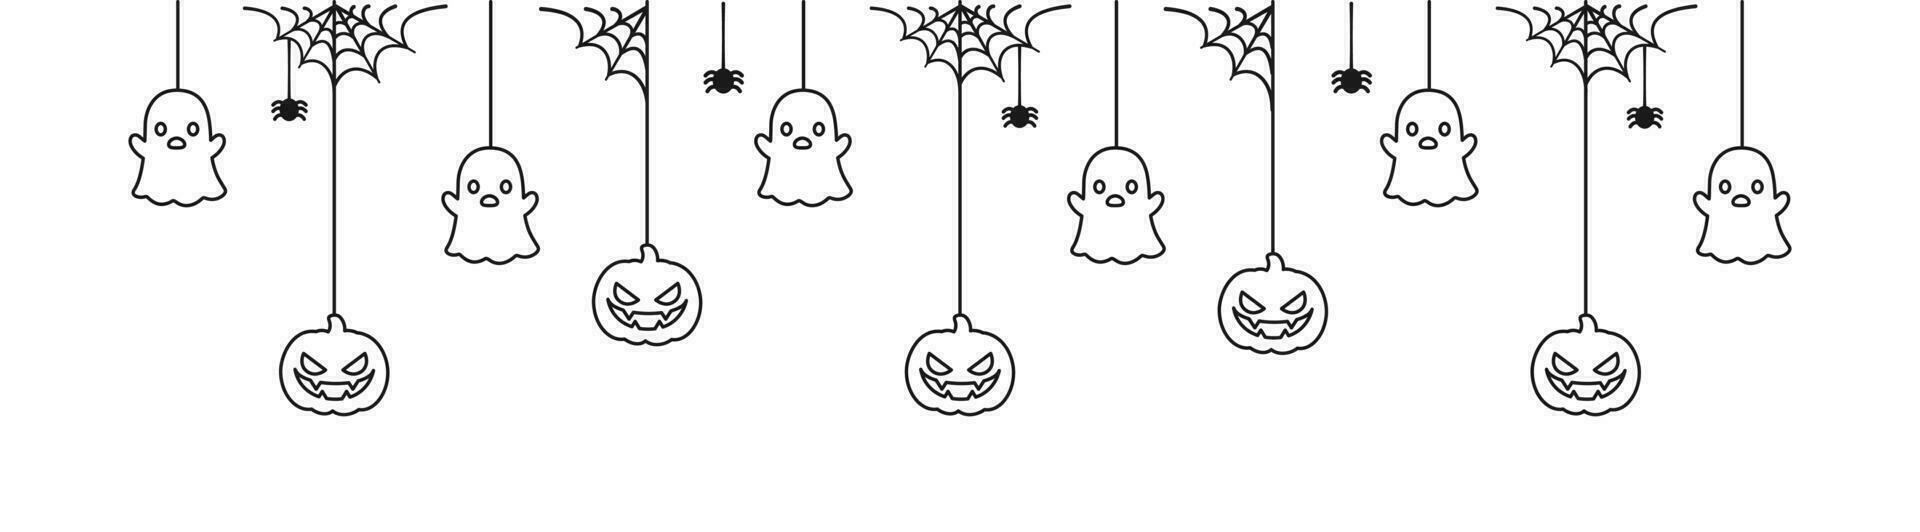 Happy Halloween banner or border with ghost and jack o lantern pumpkins outline doodle. Hanging Spooky Ornaments Decoration Vector illustration, trick or treat party invitation